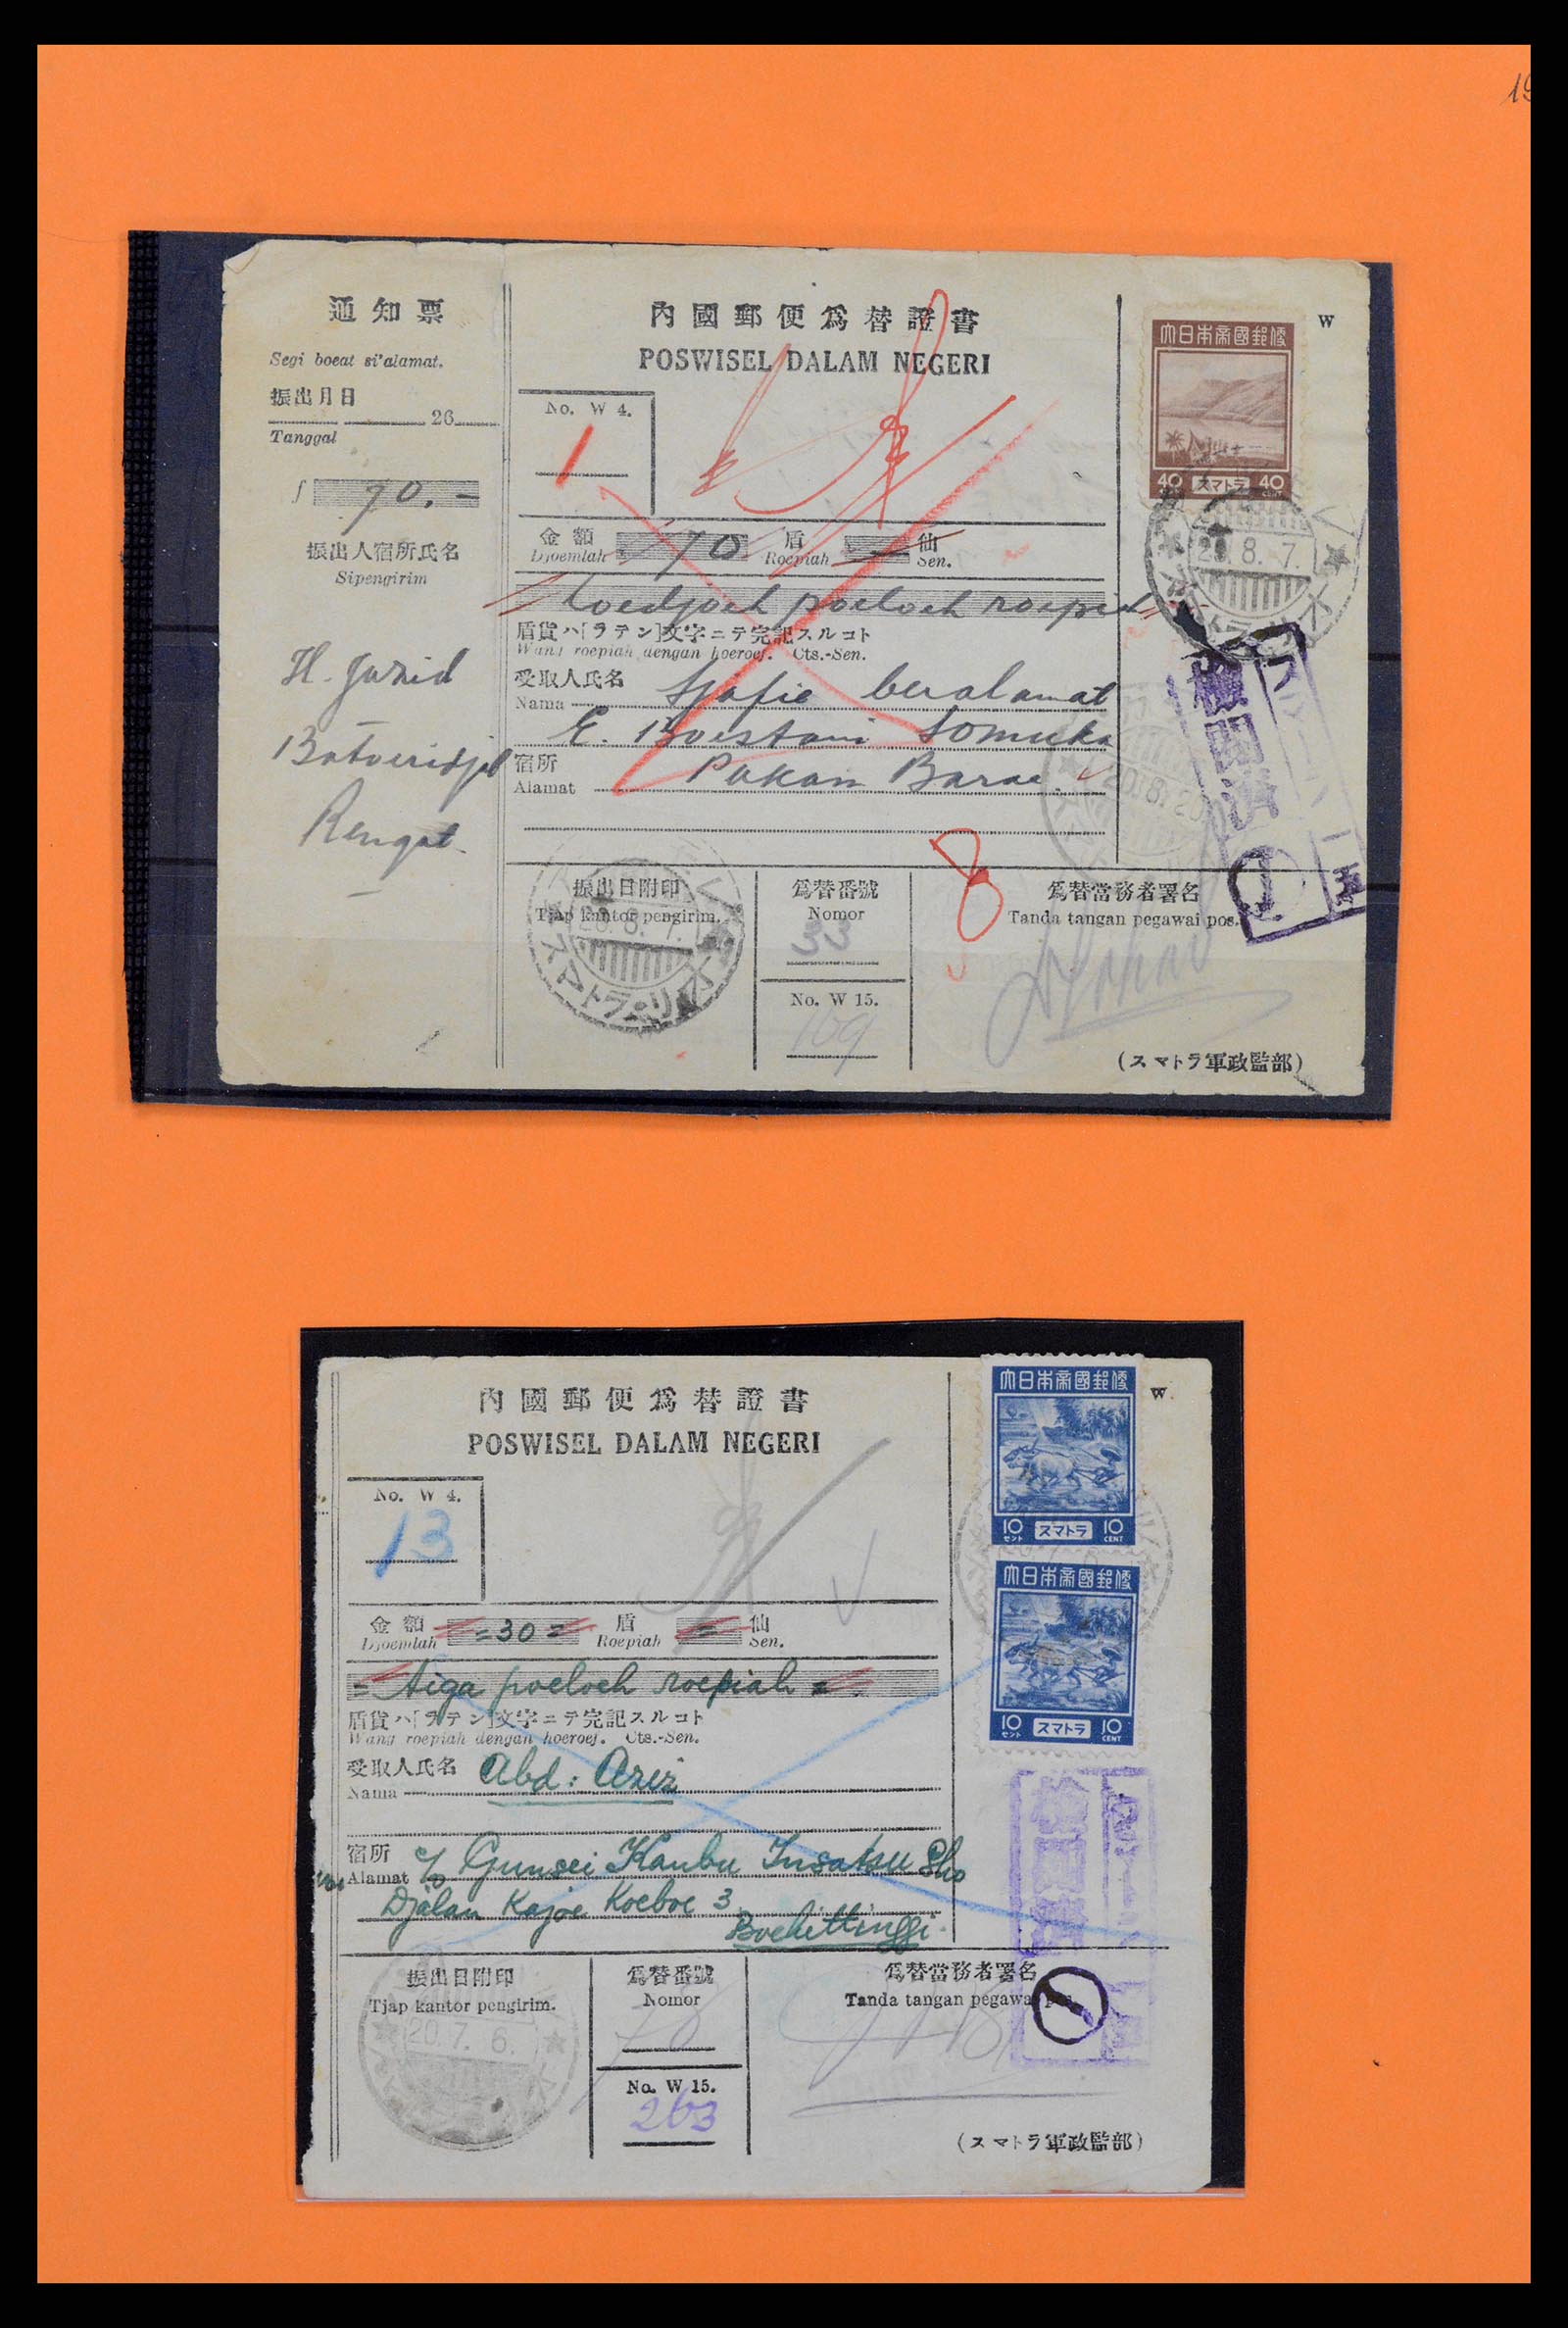 37323 004 - Stamp collection 37323 Japanese Occupation Dutch East Indies 1942-1945.